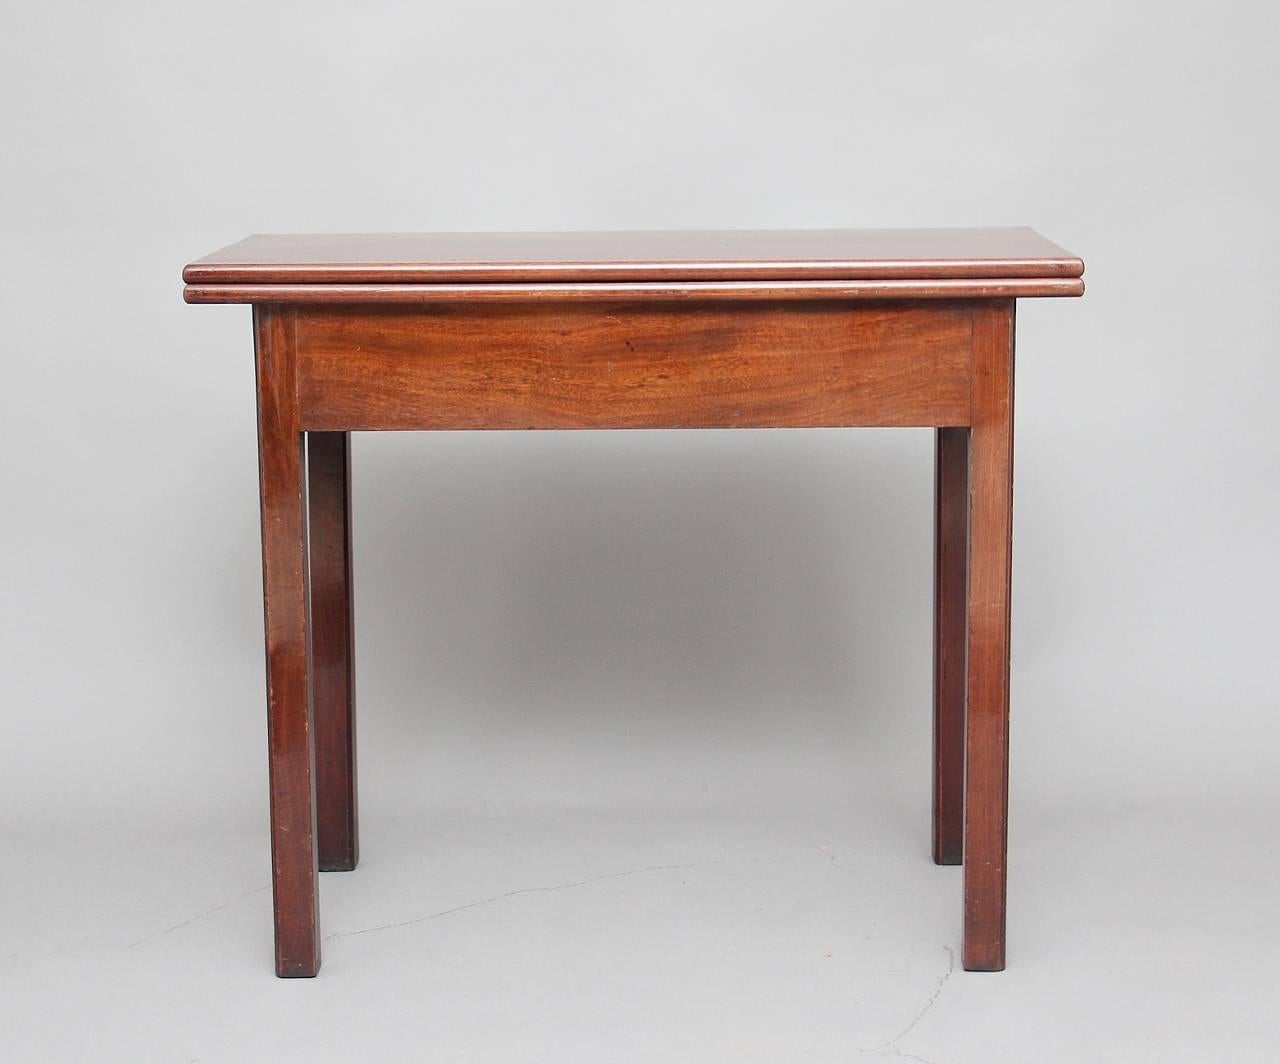 18th century mahogany tea or side table, the back leg pulling out to support the hinged rectangular top to form a square tea table, circa 1780.